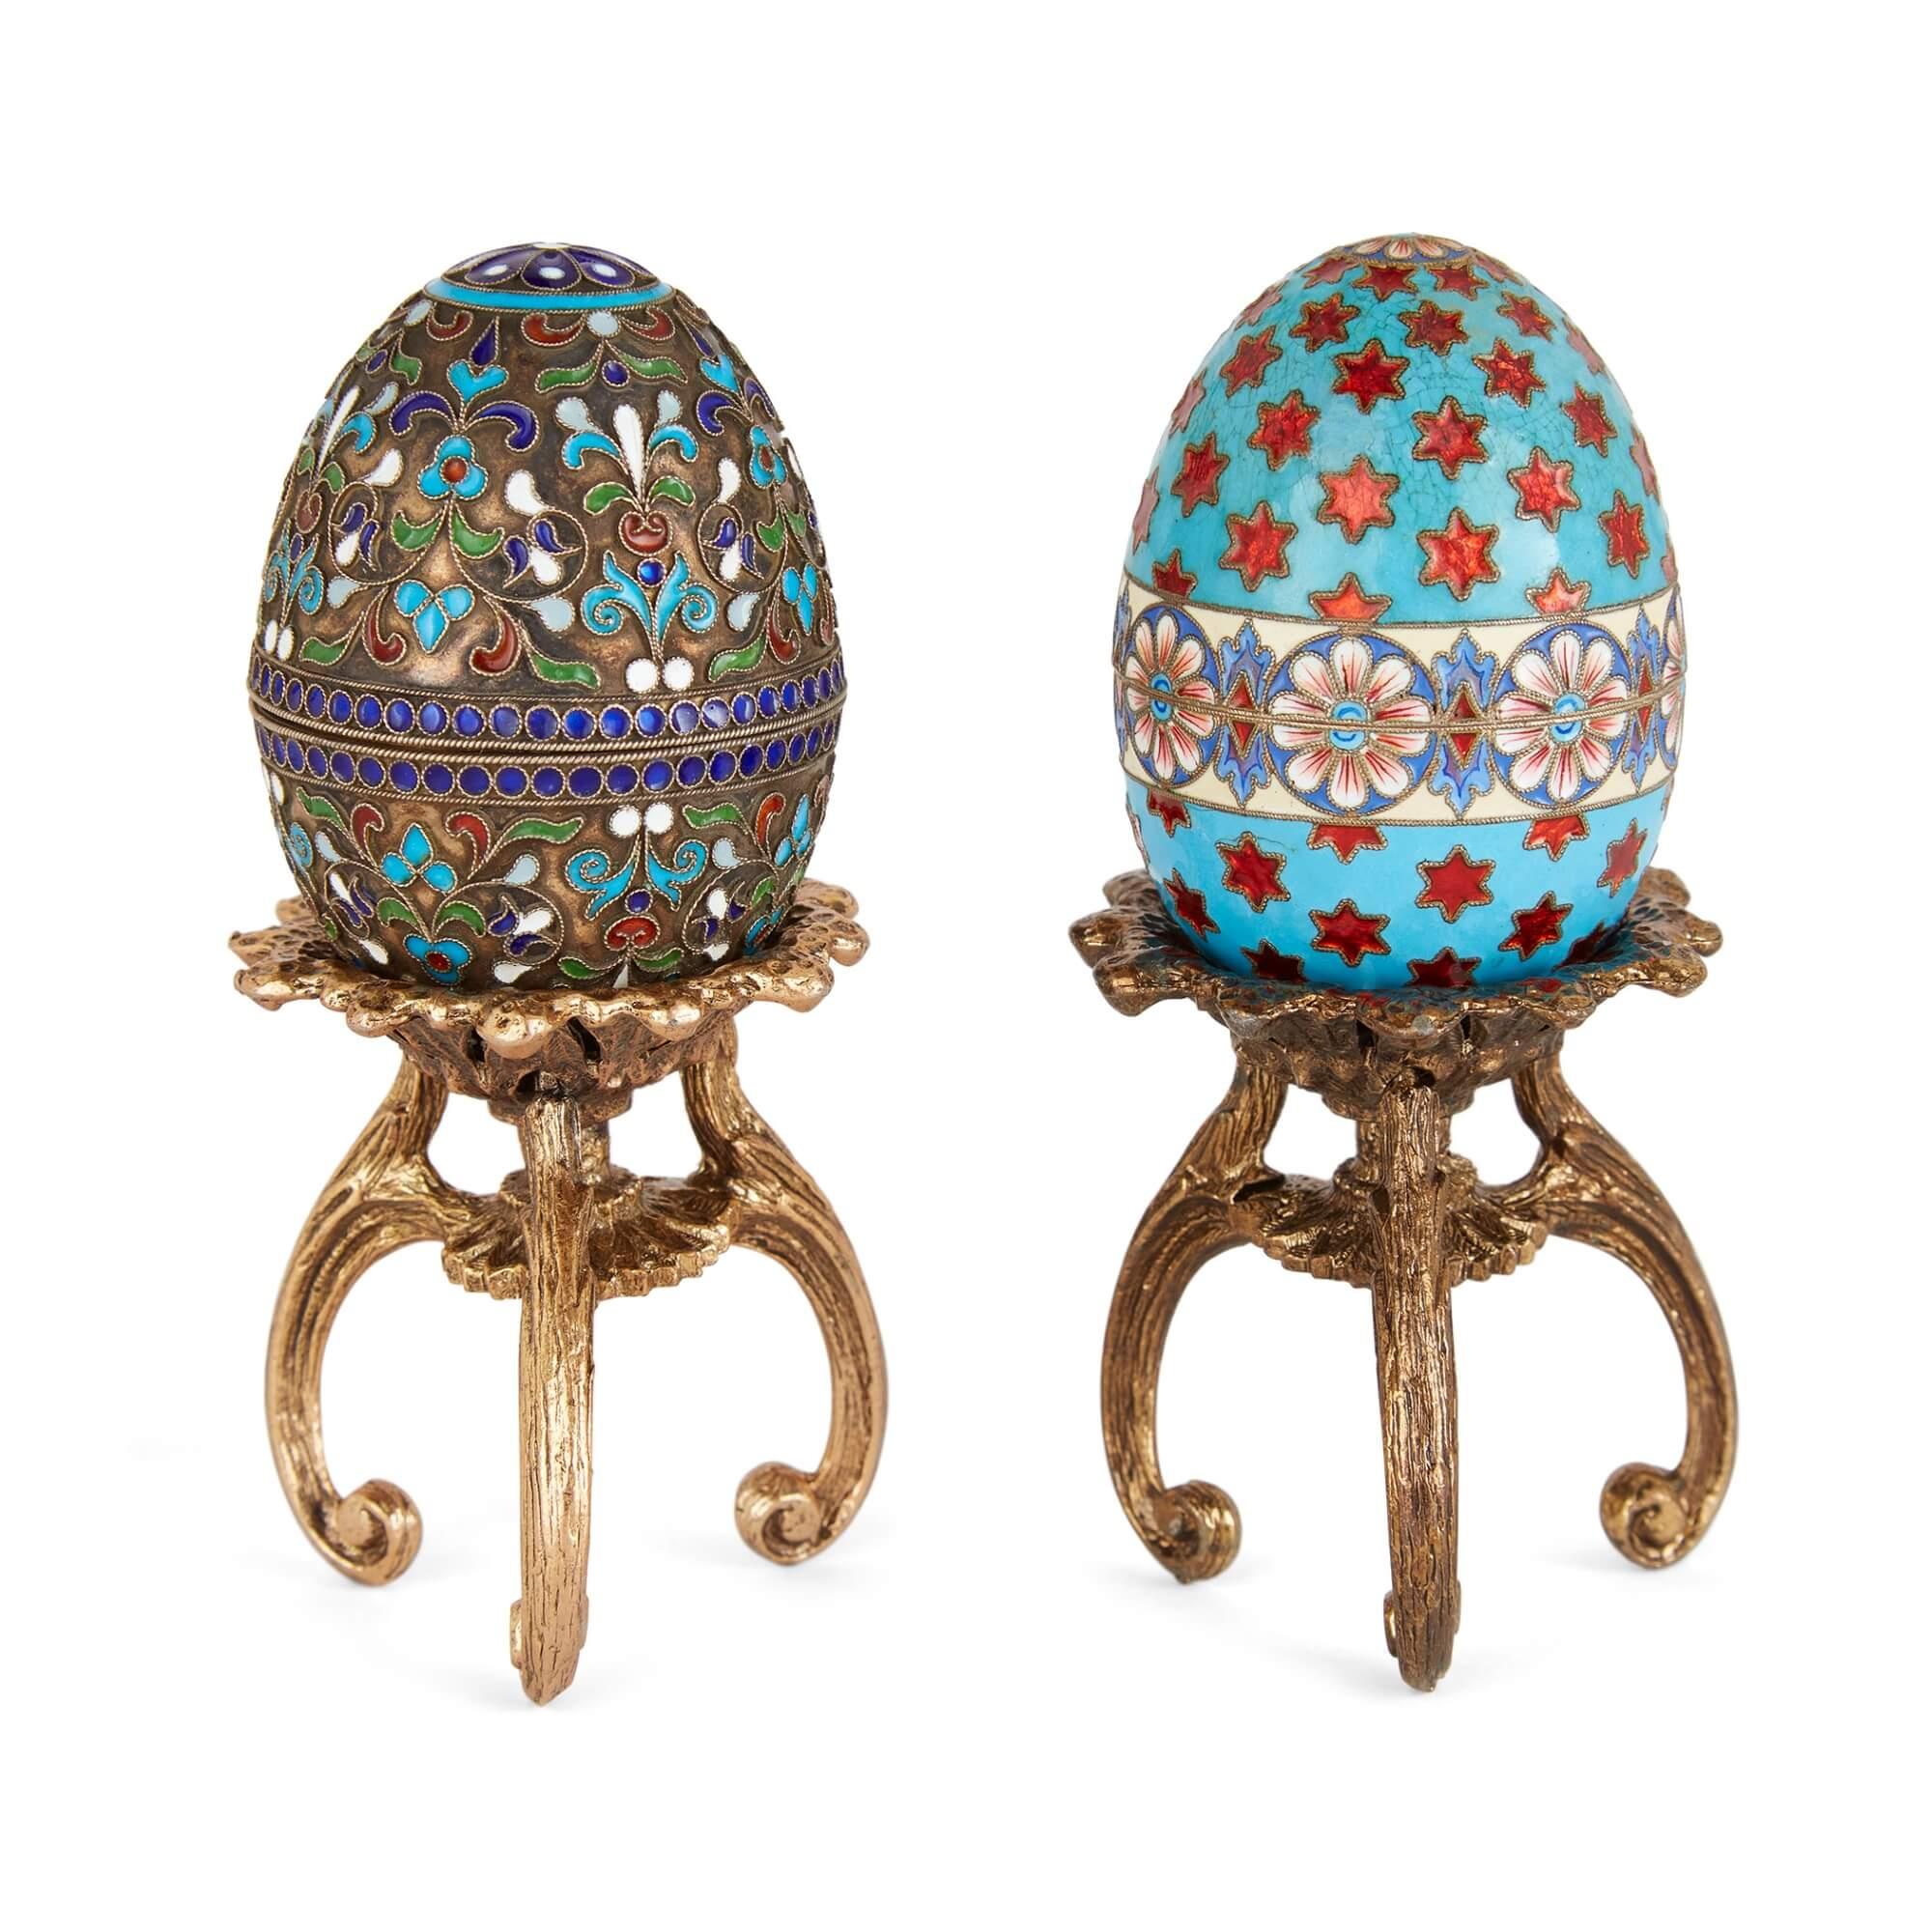 Two Russian silver gilt and cloisonné enamel eggs on stands  
Russian, 20th Century 
Height 12cm, diameter 4.5cm    

These stunning Russian eggs are crafted from silver gilt and decorated using the complex technique of cloisonné enamelling.  

The